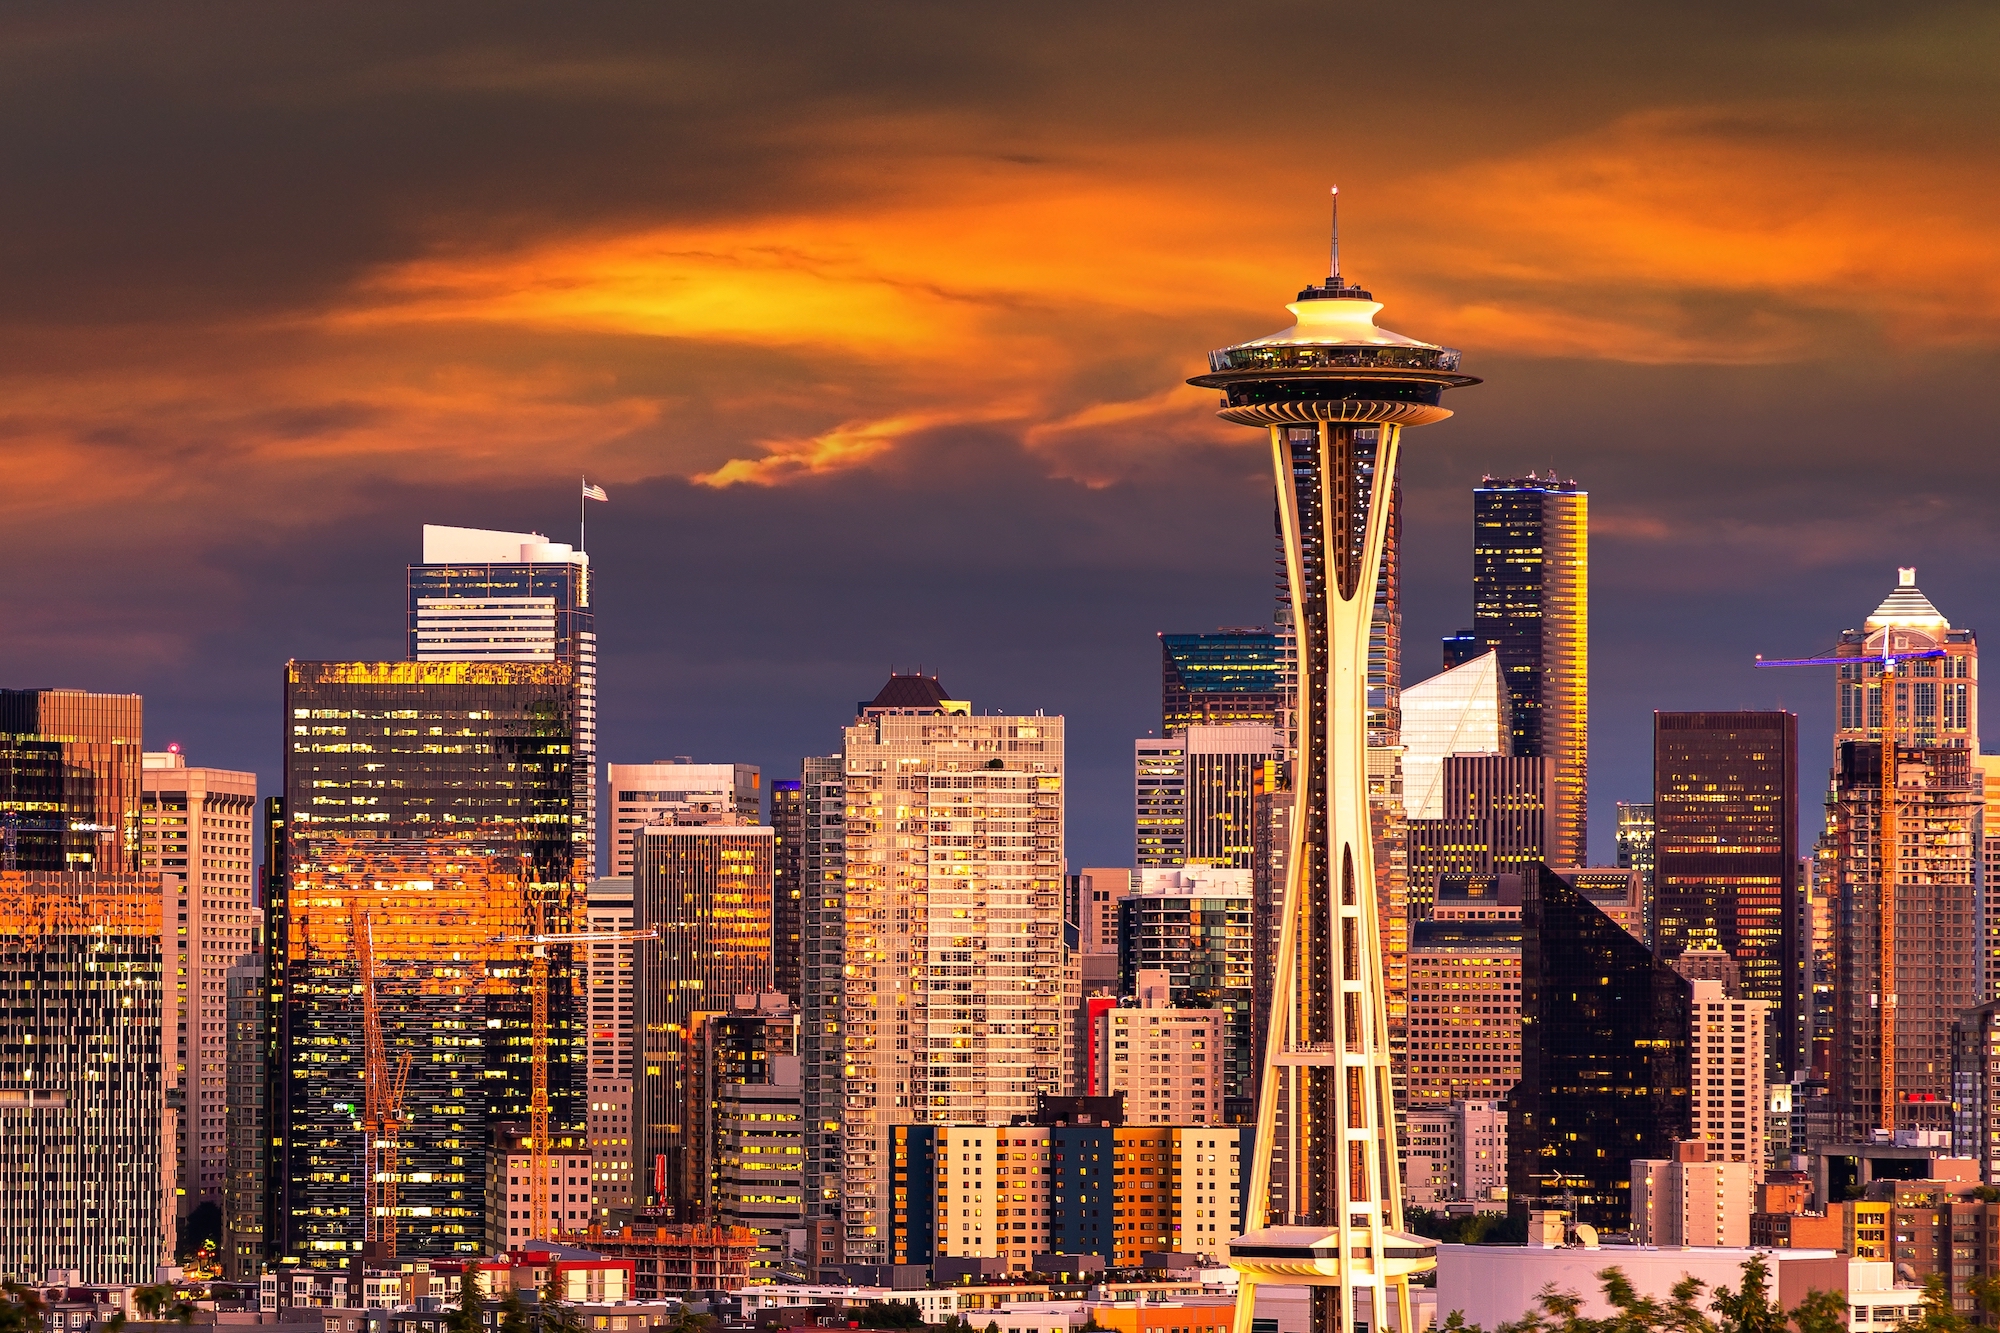 A photo of the Seattle skyline is shown.